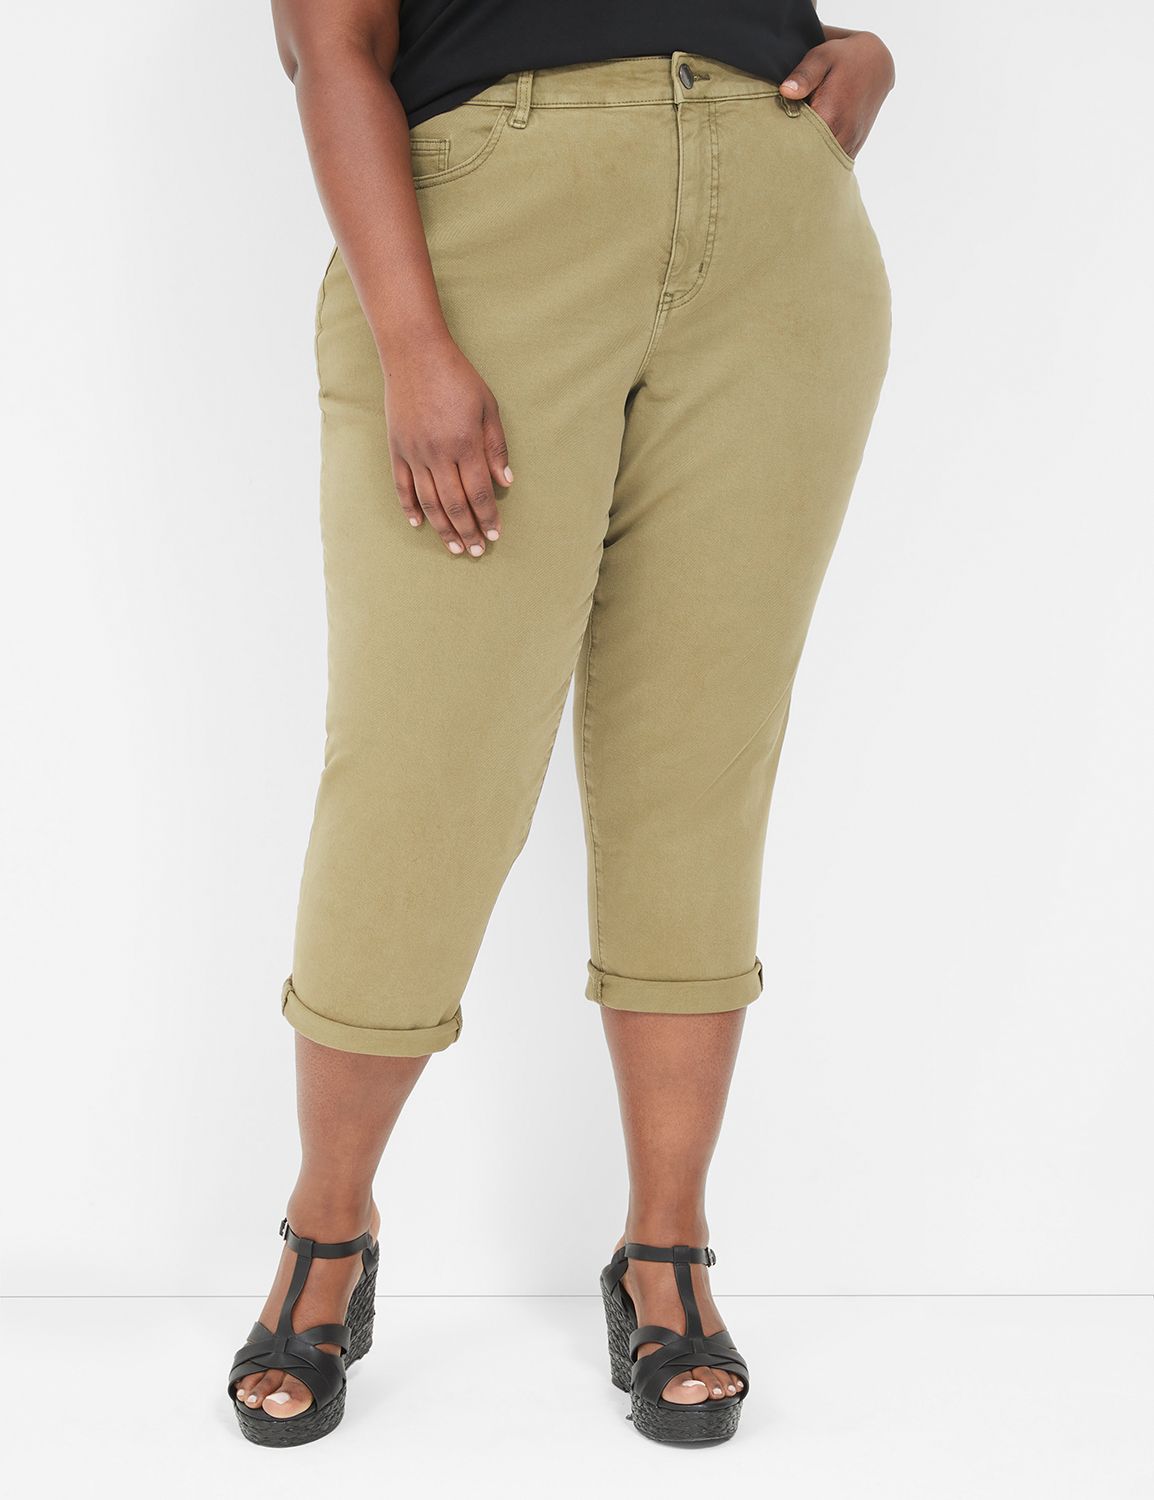 Hue Capri and cropped jeans for Women